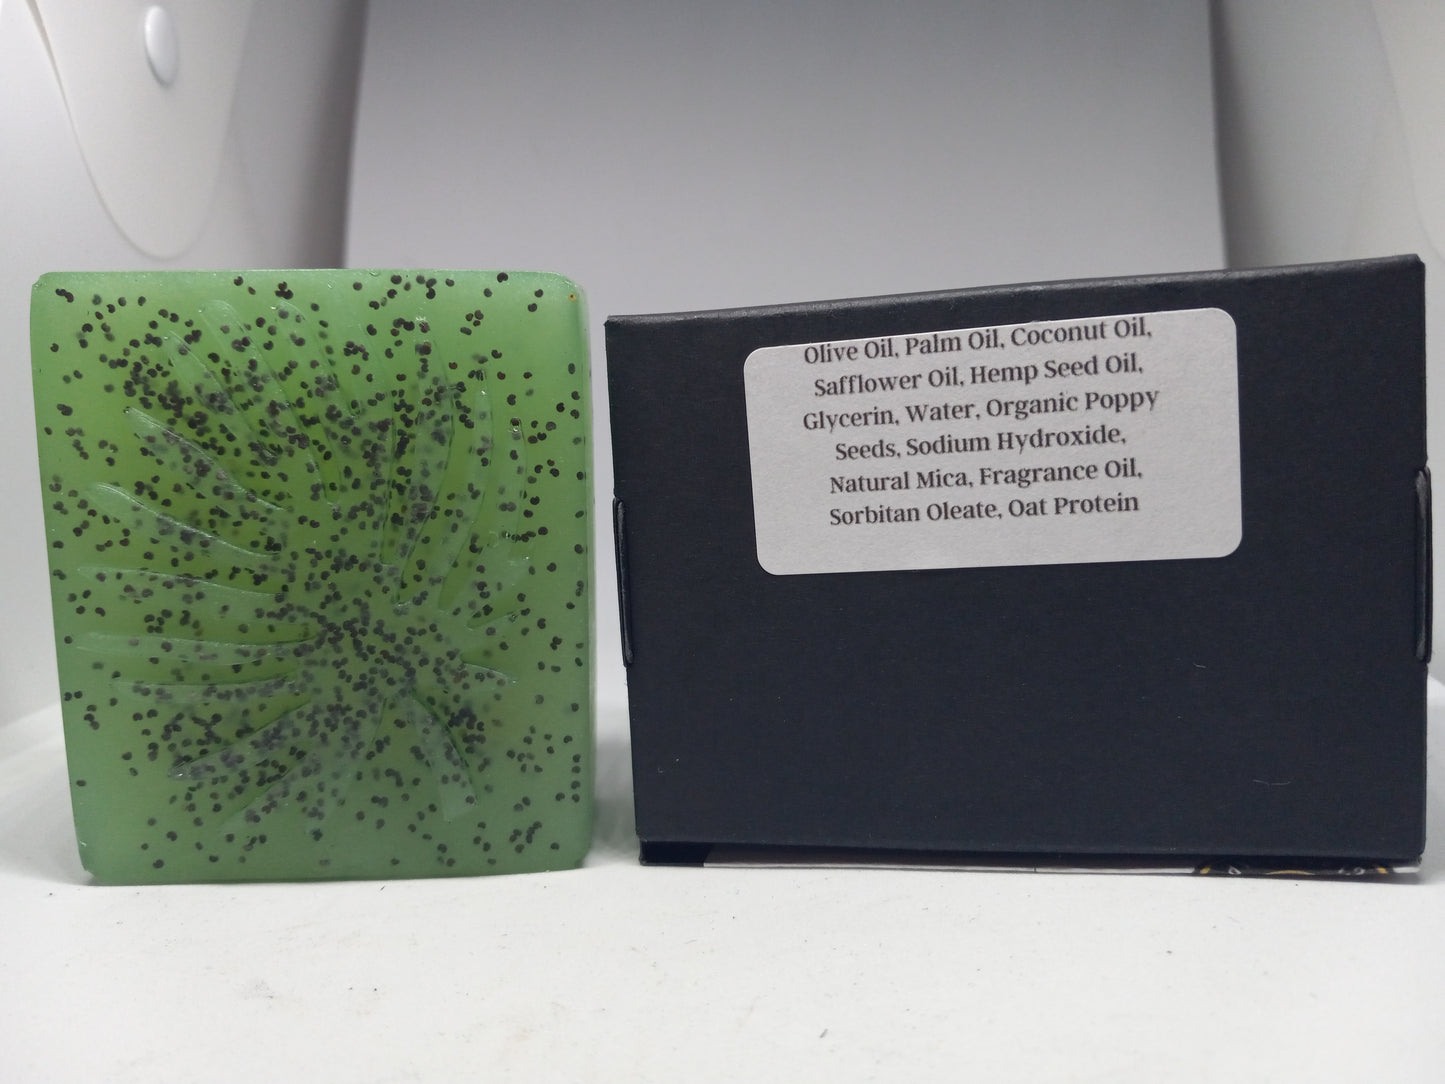 Eucalyptus and Cotton  - Hand Poured Exfoliating Olive Oil / Hemp Seed Oil soap